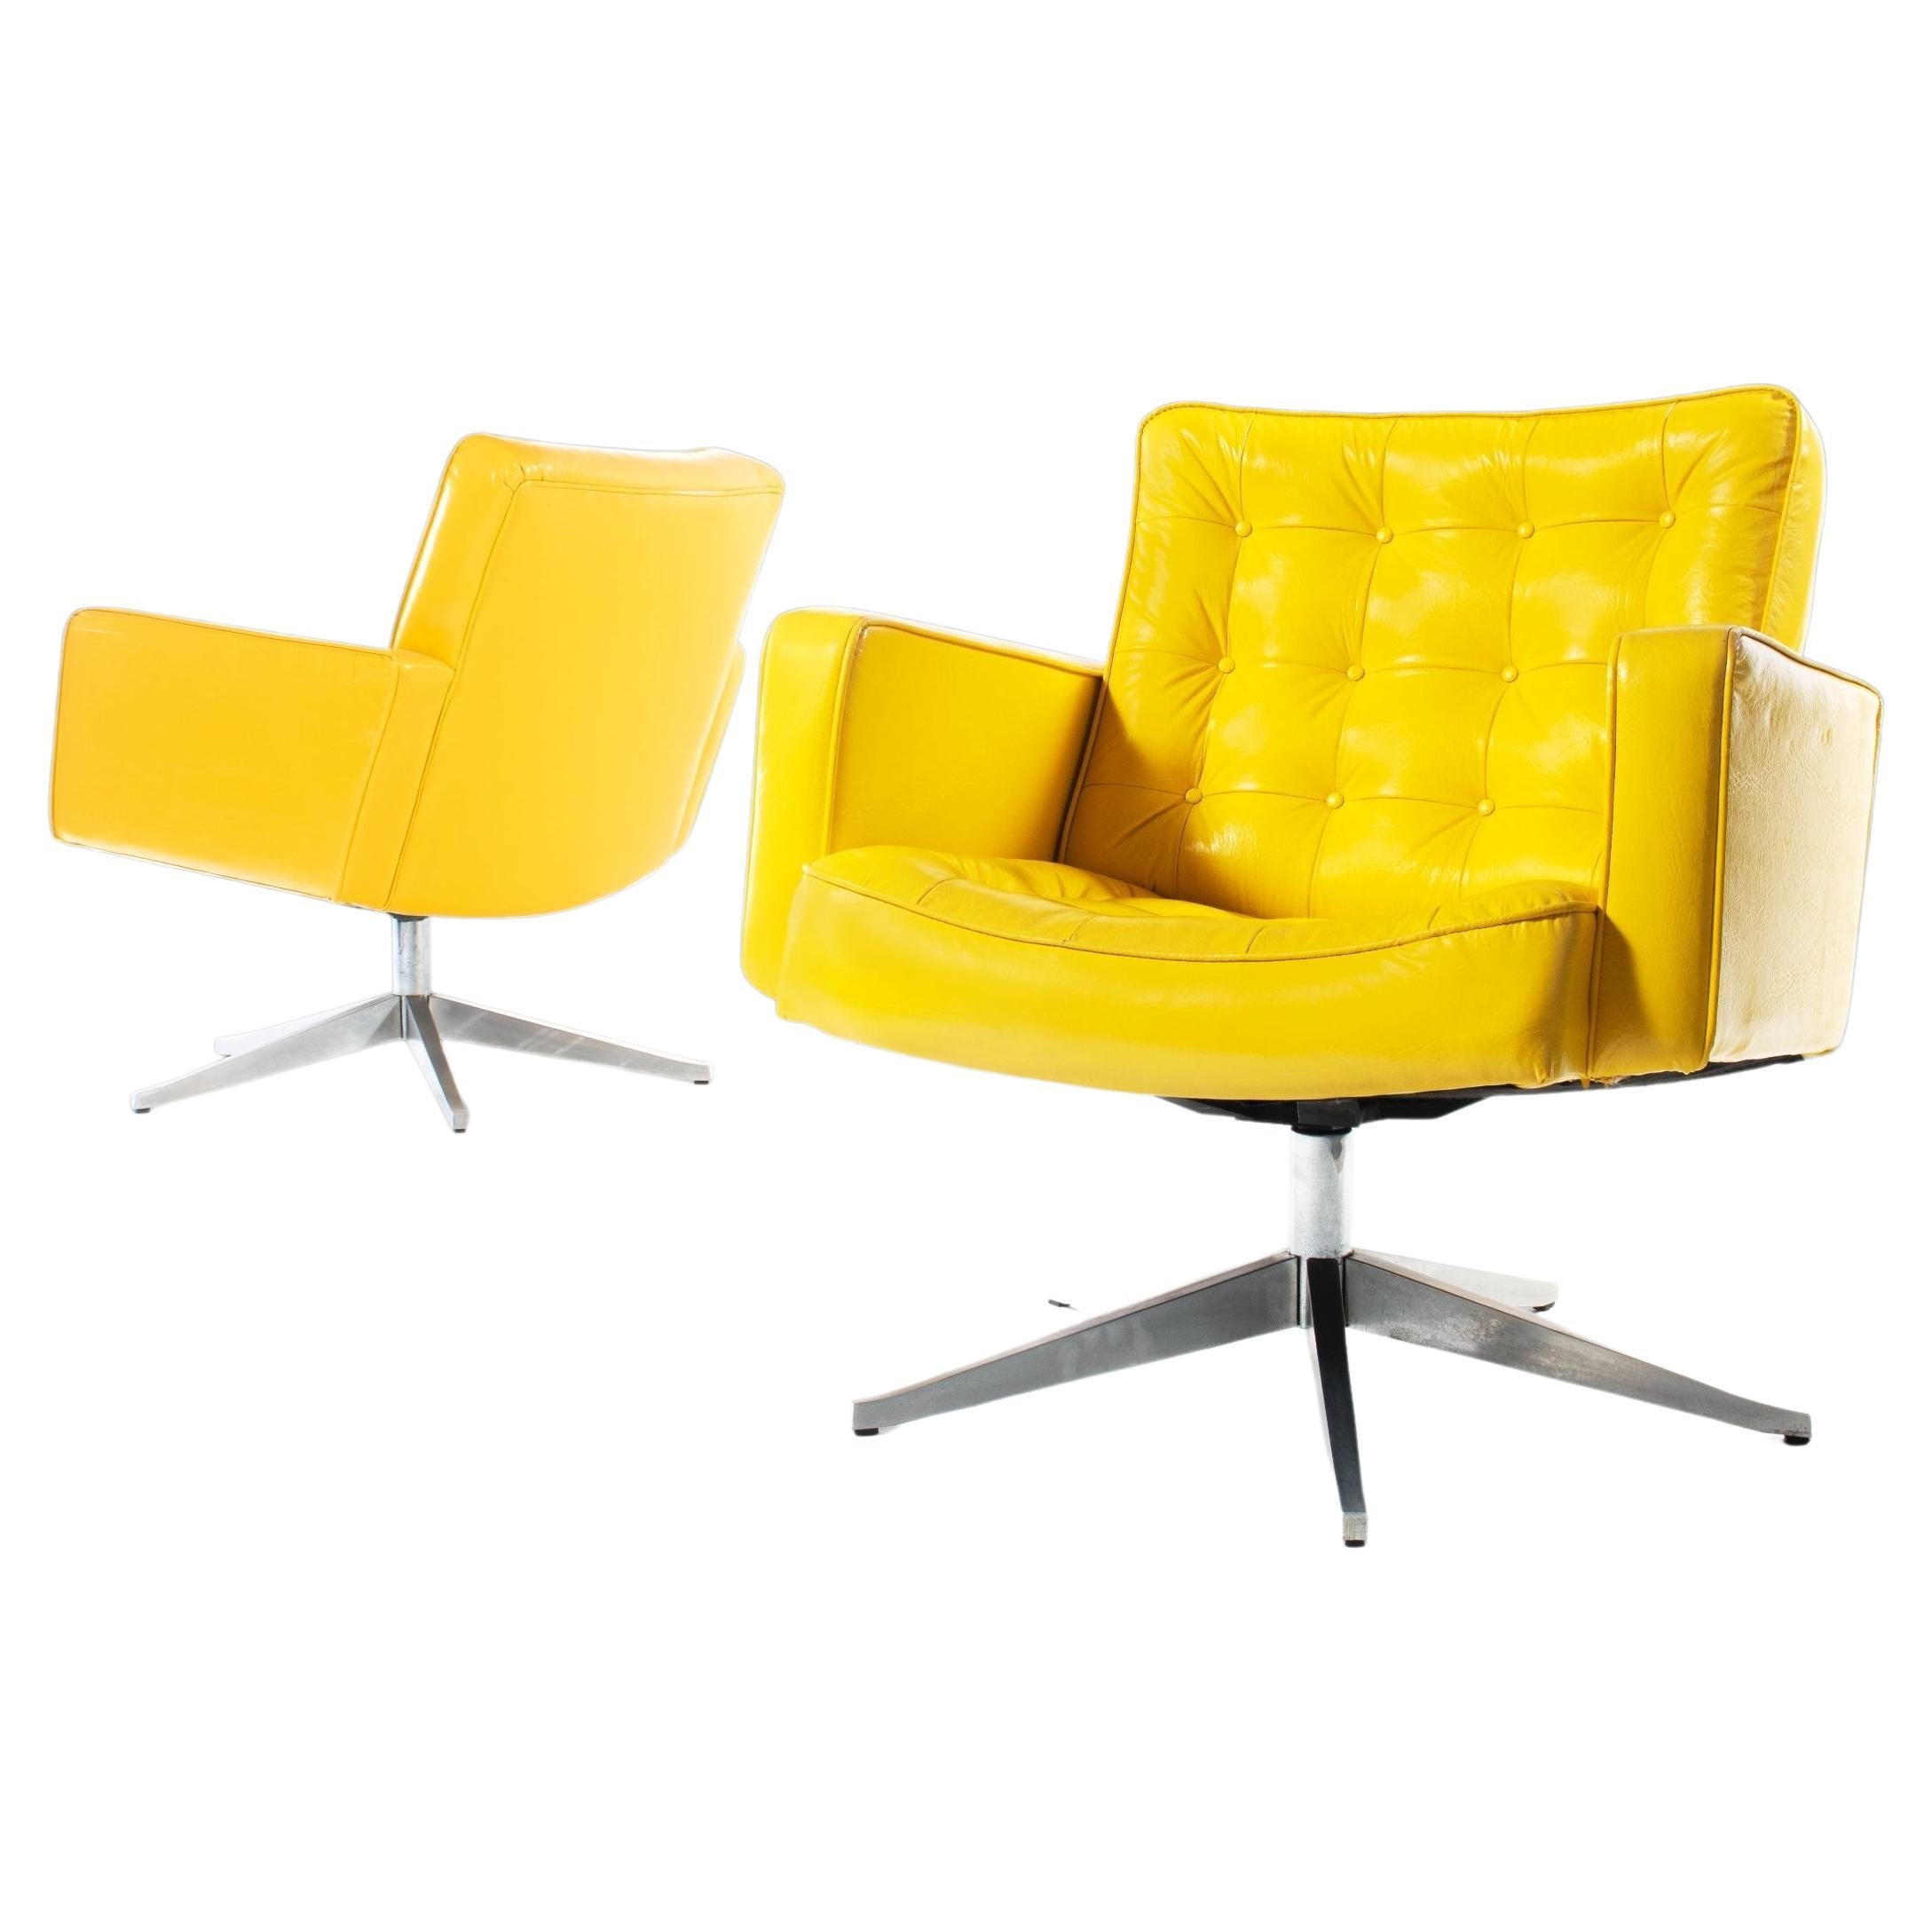 Set of Two '2' Swivel Lounge Chairs Vincent Cafiero for Knoll, USA, c. 1960's